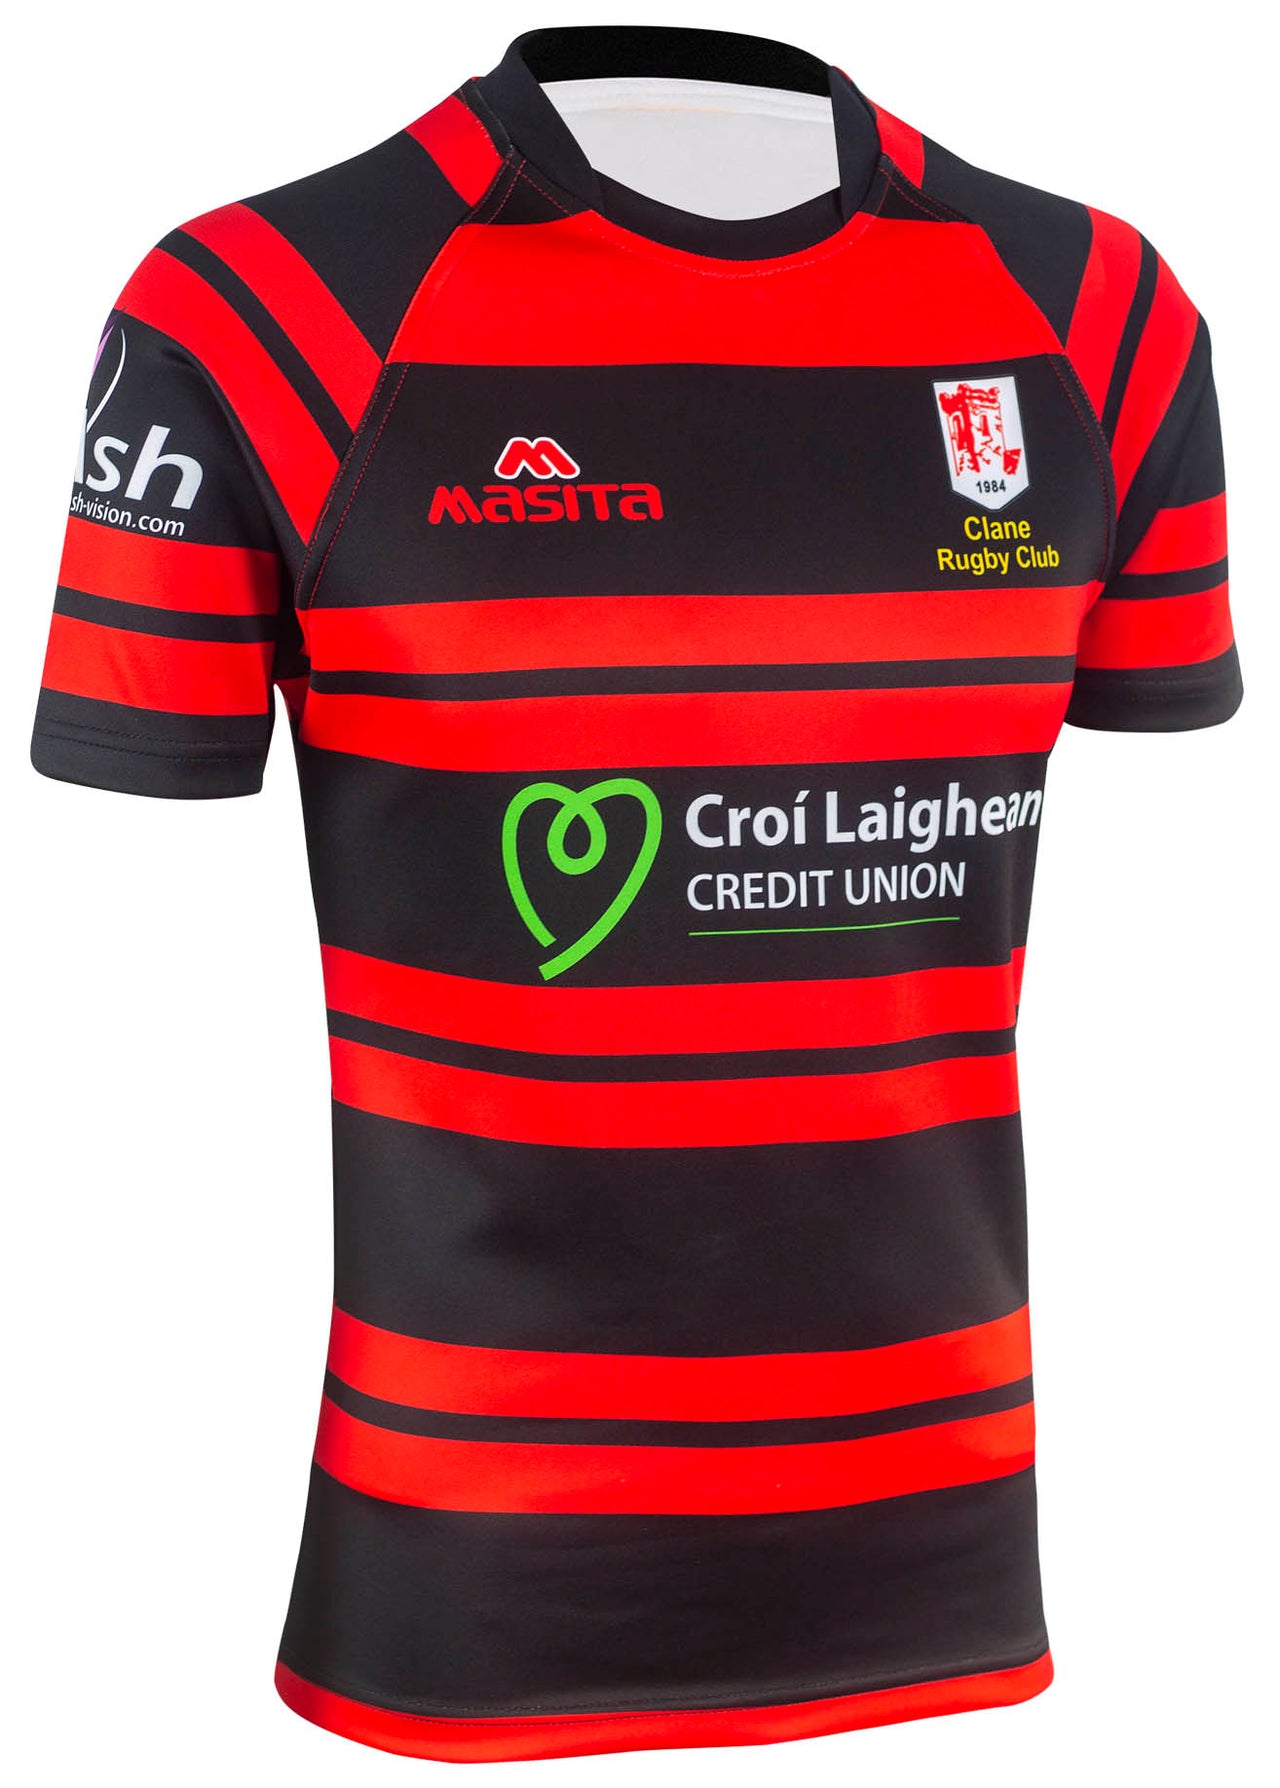 Clane Rugby Jersey Unisex Fit Adult